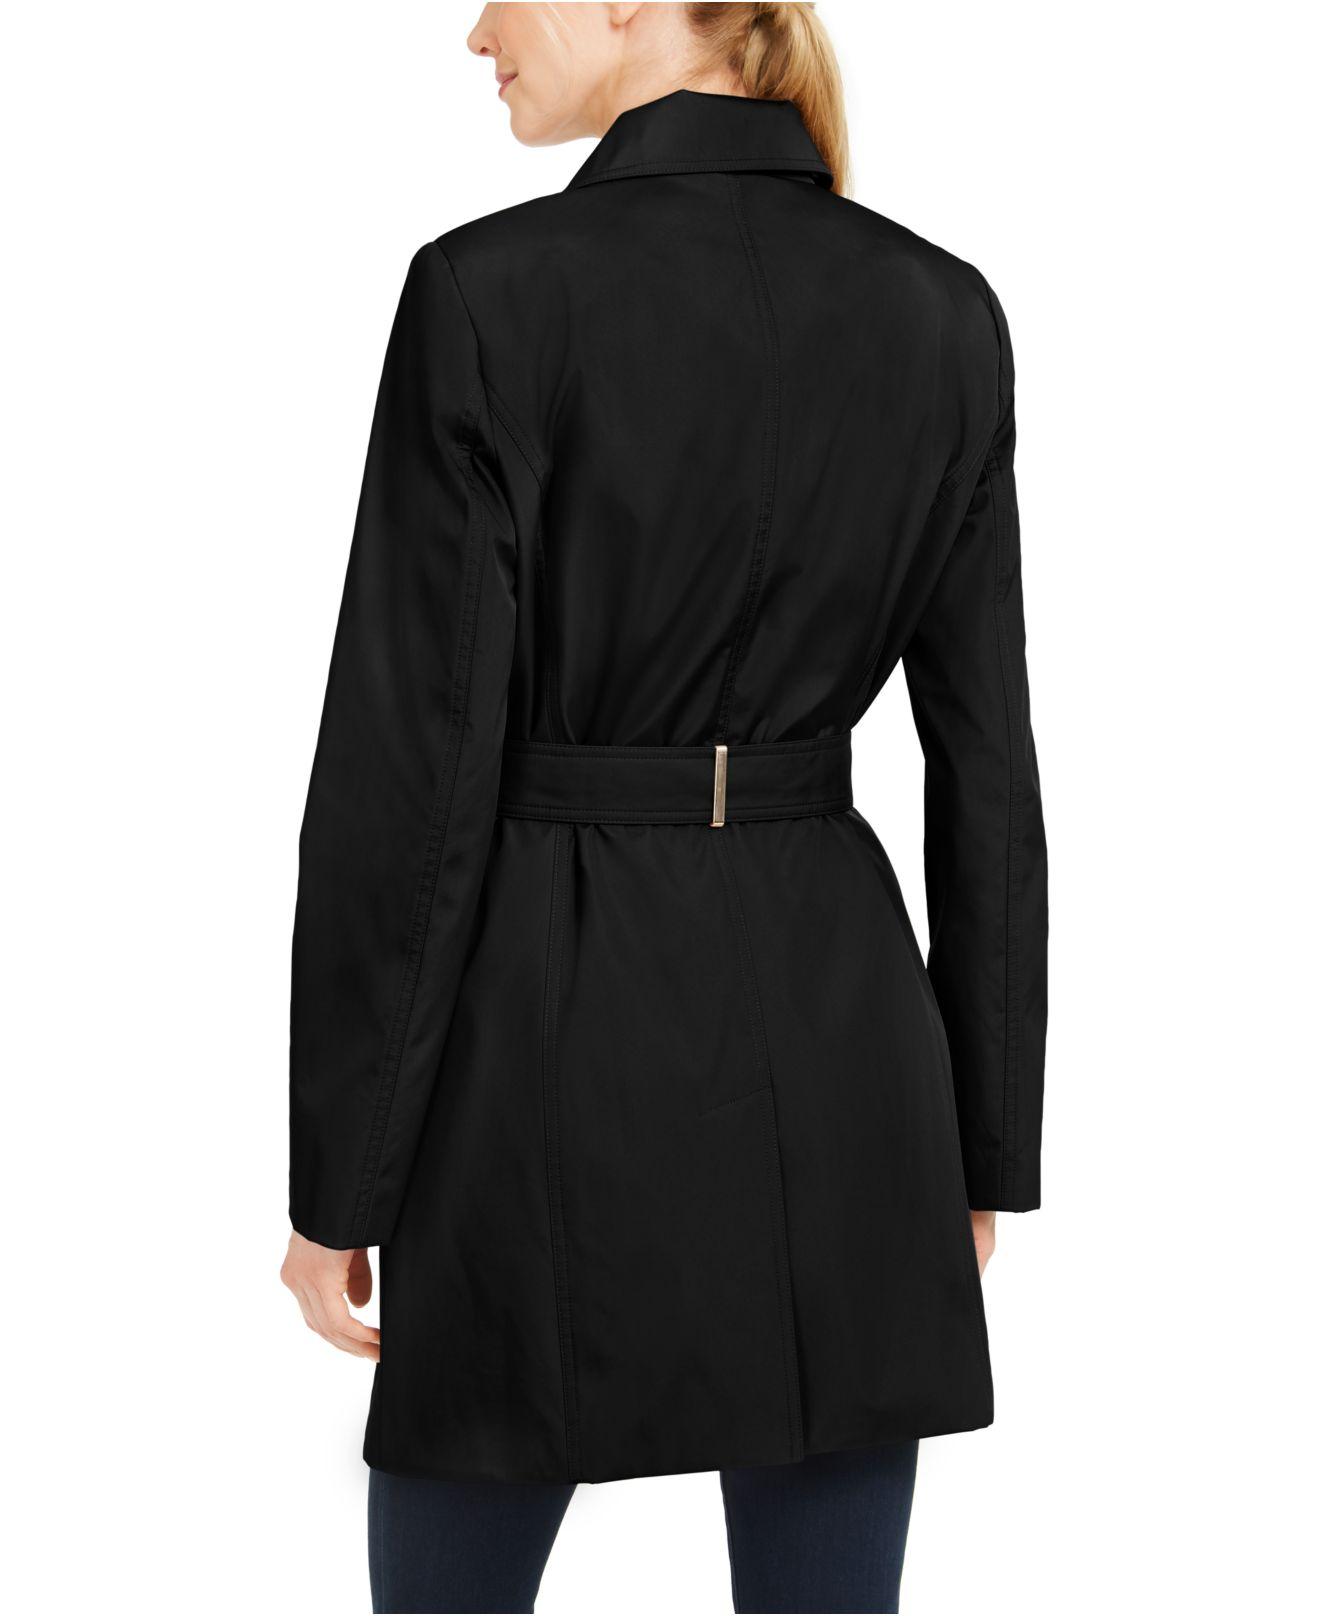 Calvin Klein Synthetic Hooded Water-resistant Trench Coat in Black - Lyst